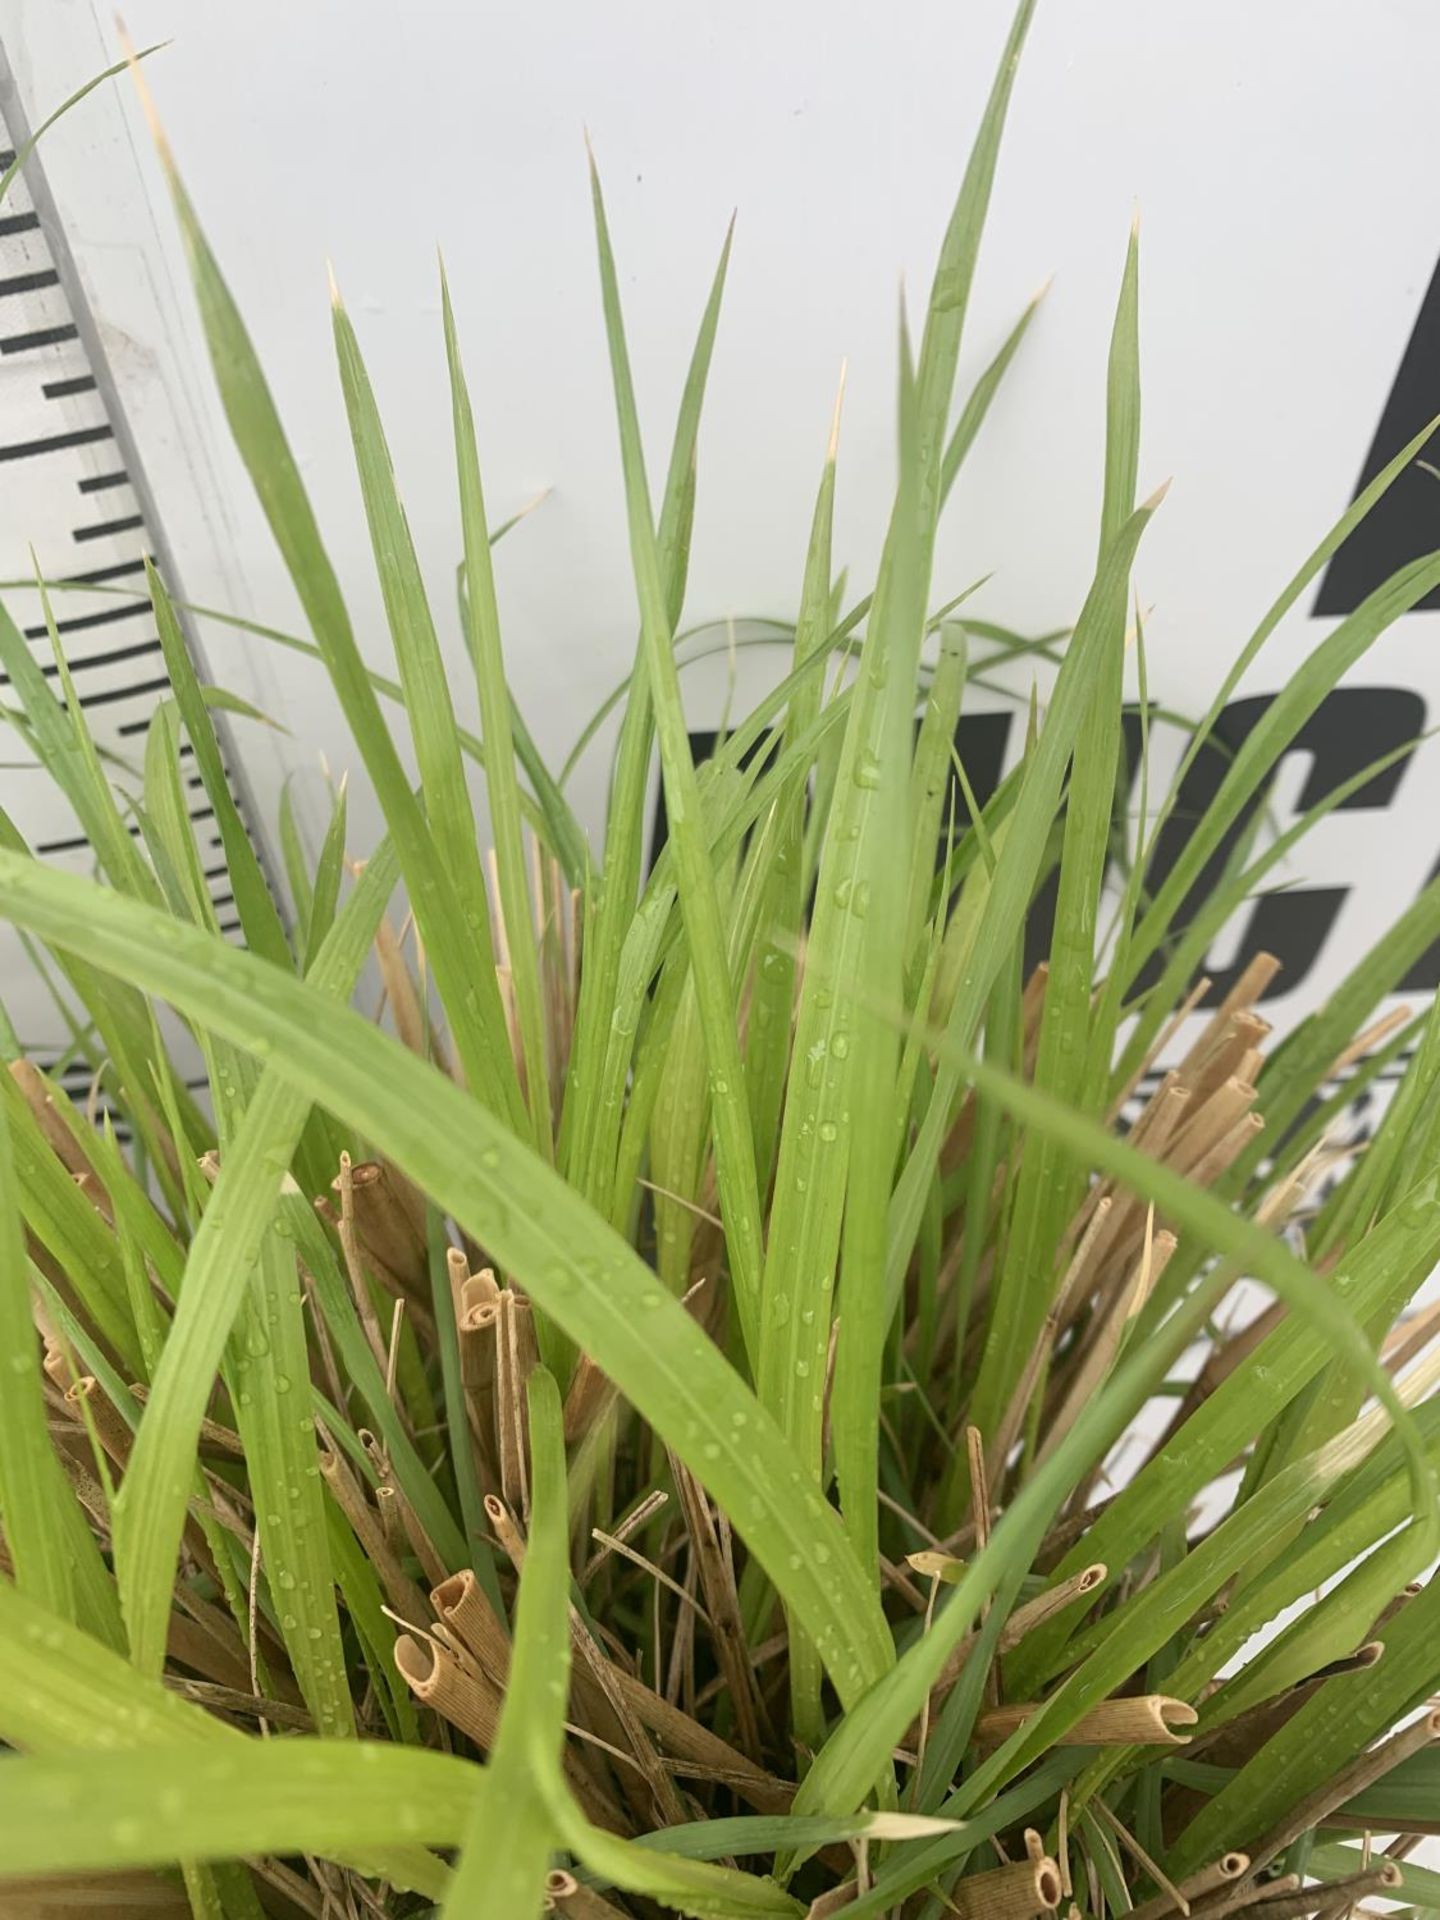 TWO ORNAMENTAL GRASSES 'PENNISETUM VIRIDESCENS' IN 10 LTR POTS APPROX 60CM IN HEIGHT PLUS VAT TO - Image 3 of 4